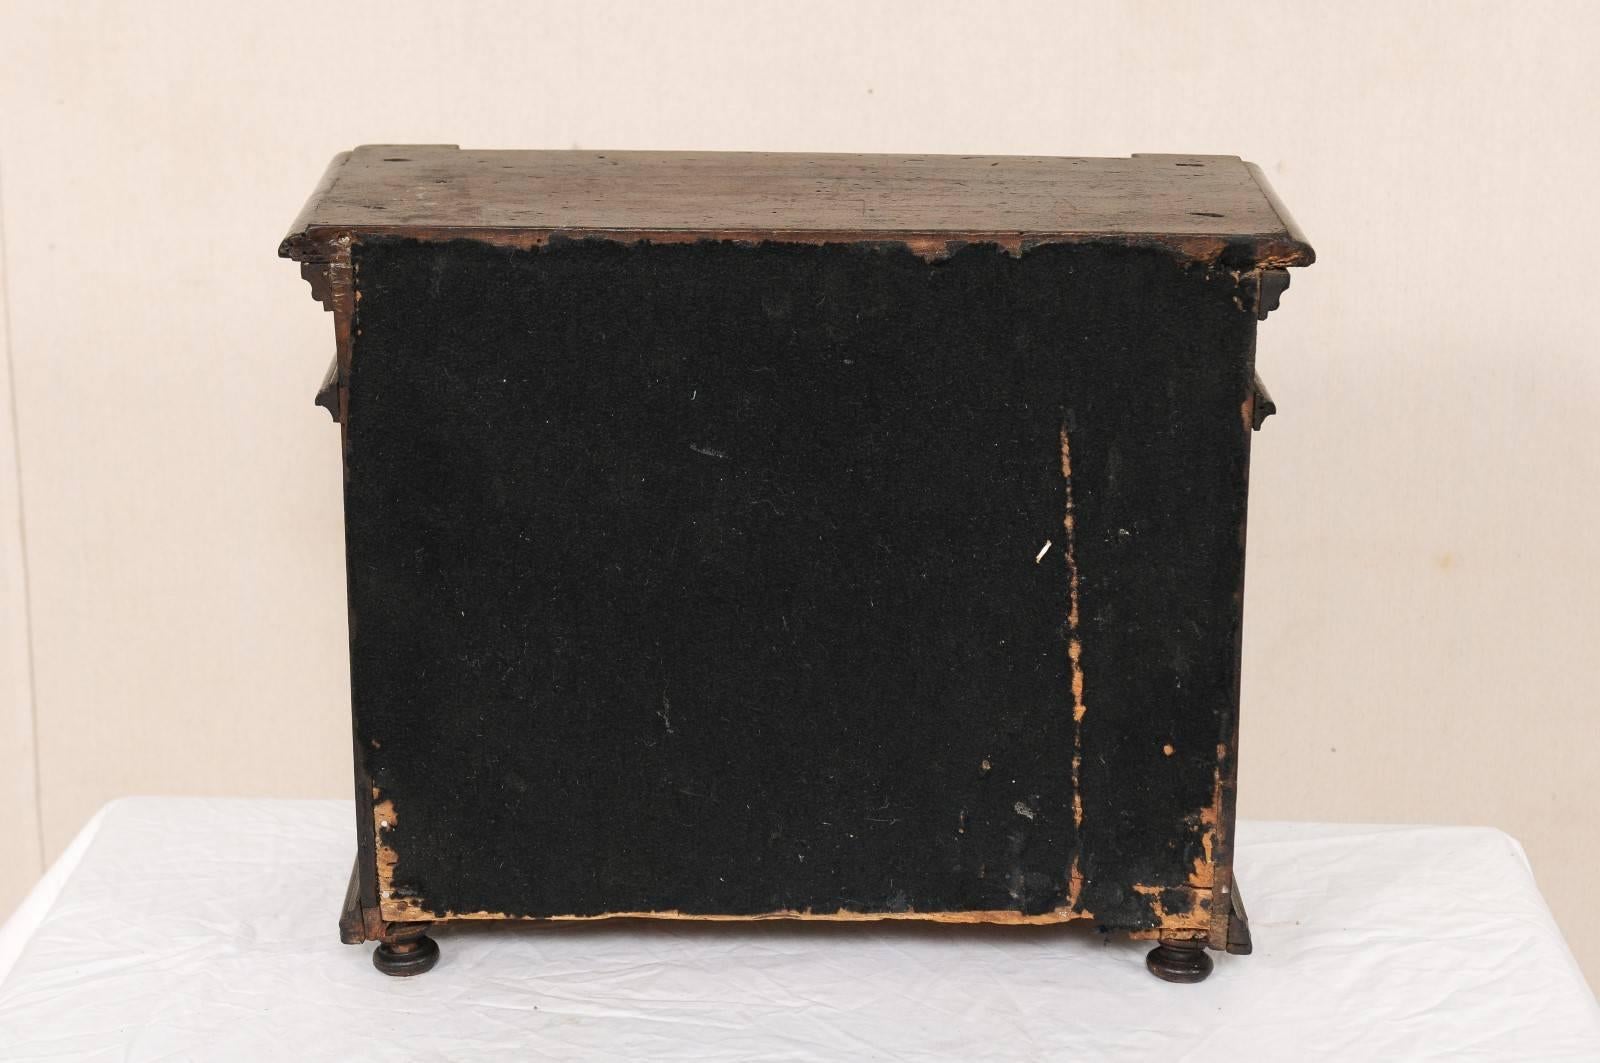 Italian Early 18th Century Petite-Sized Walnut Chest w/Drawers for Table-Top  For Sale 4